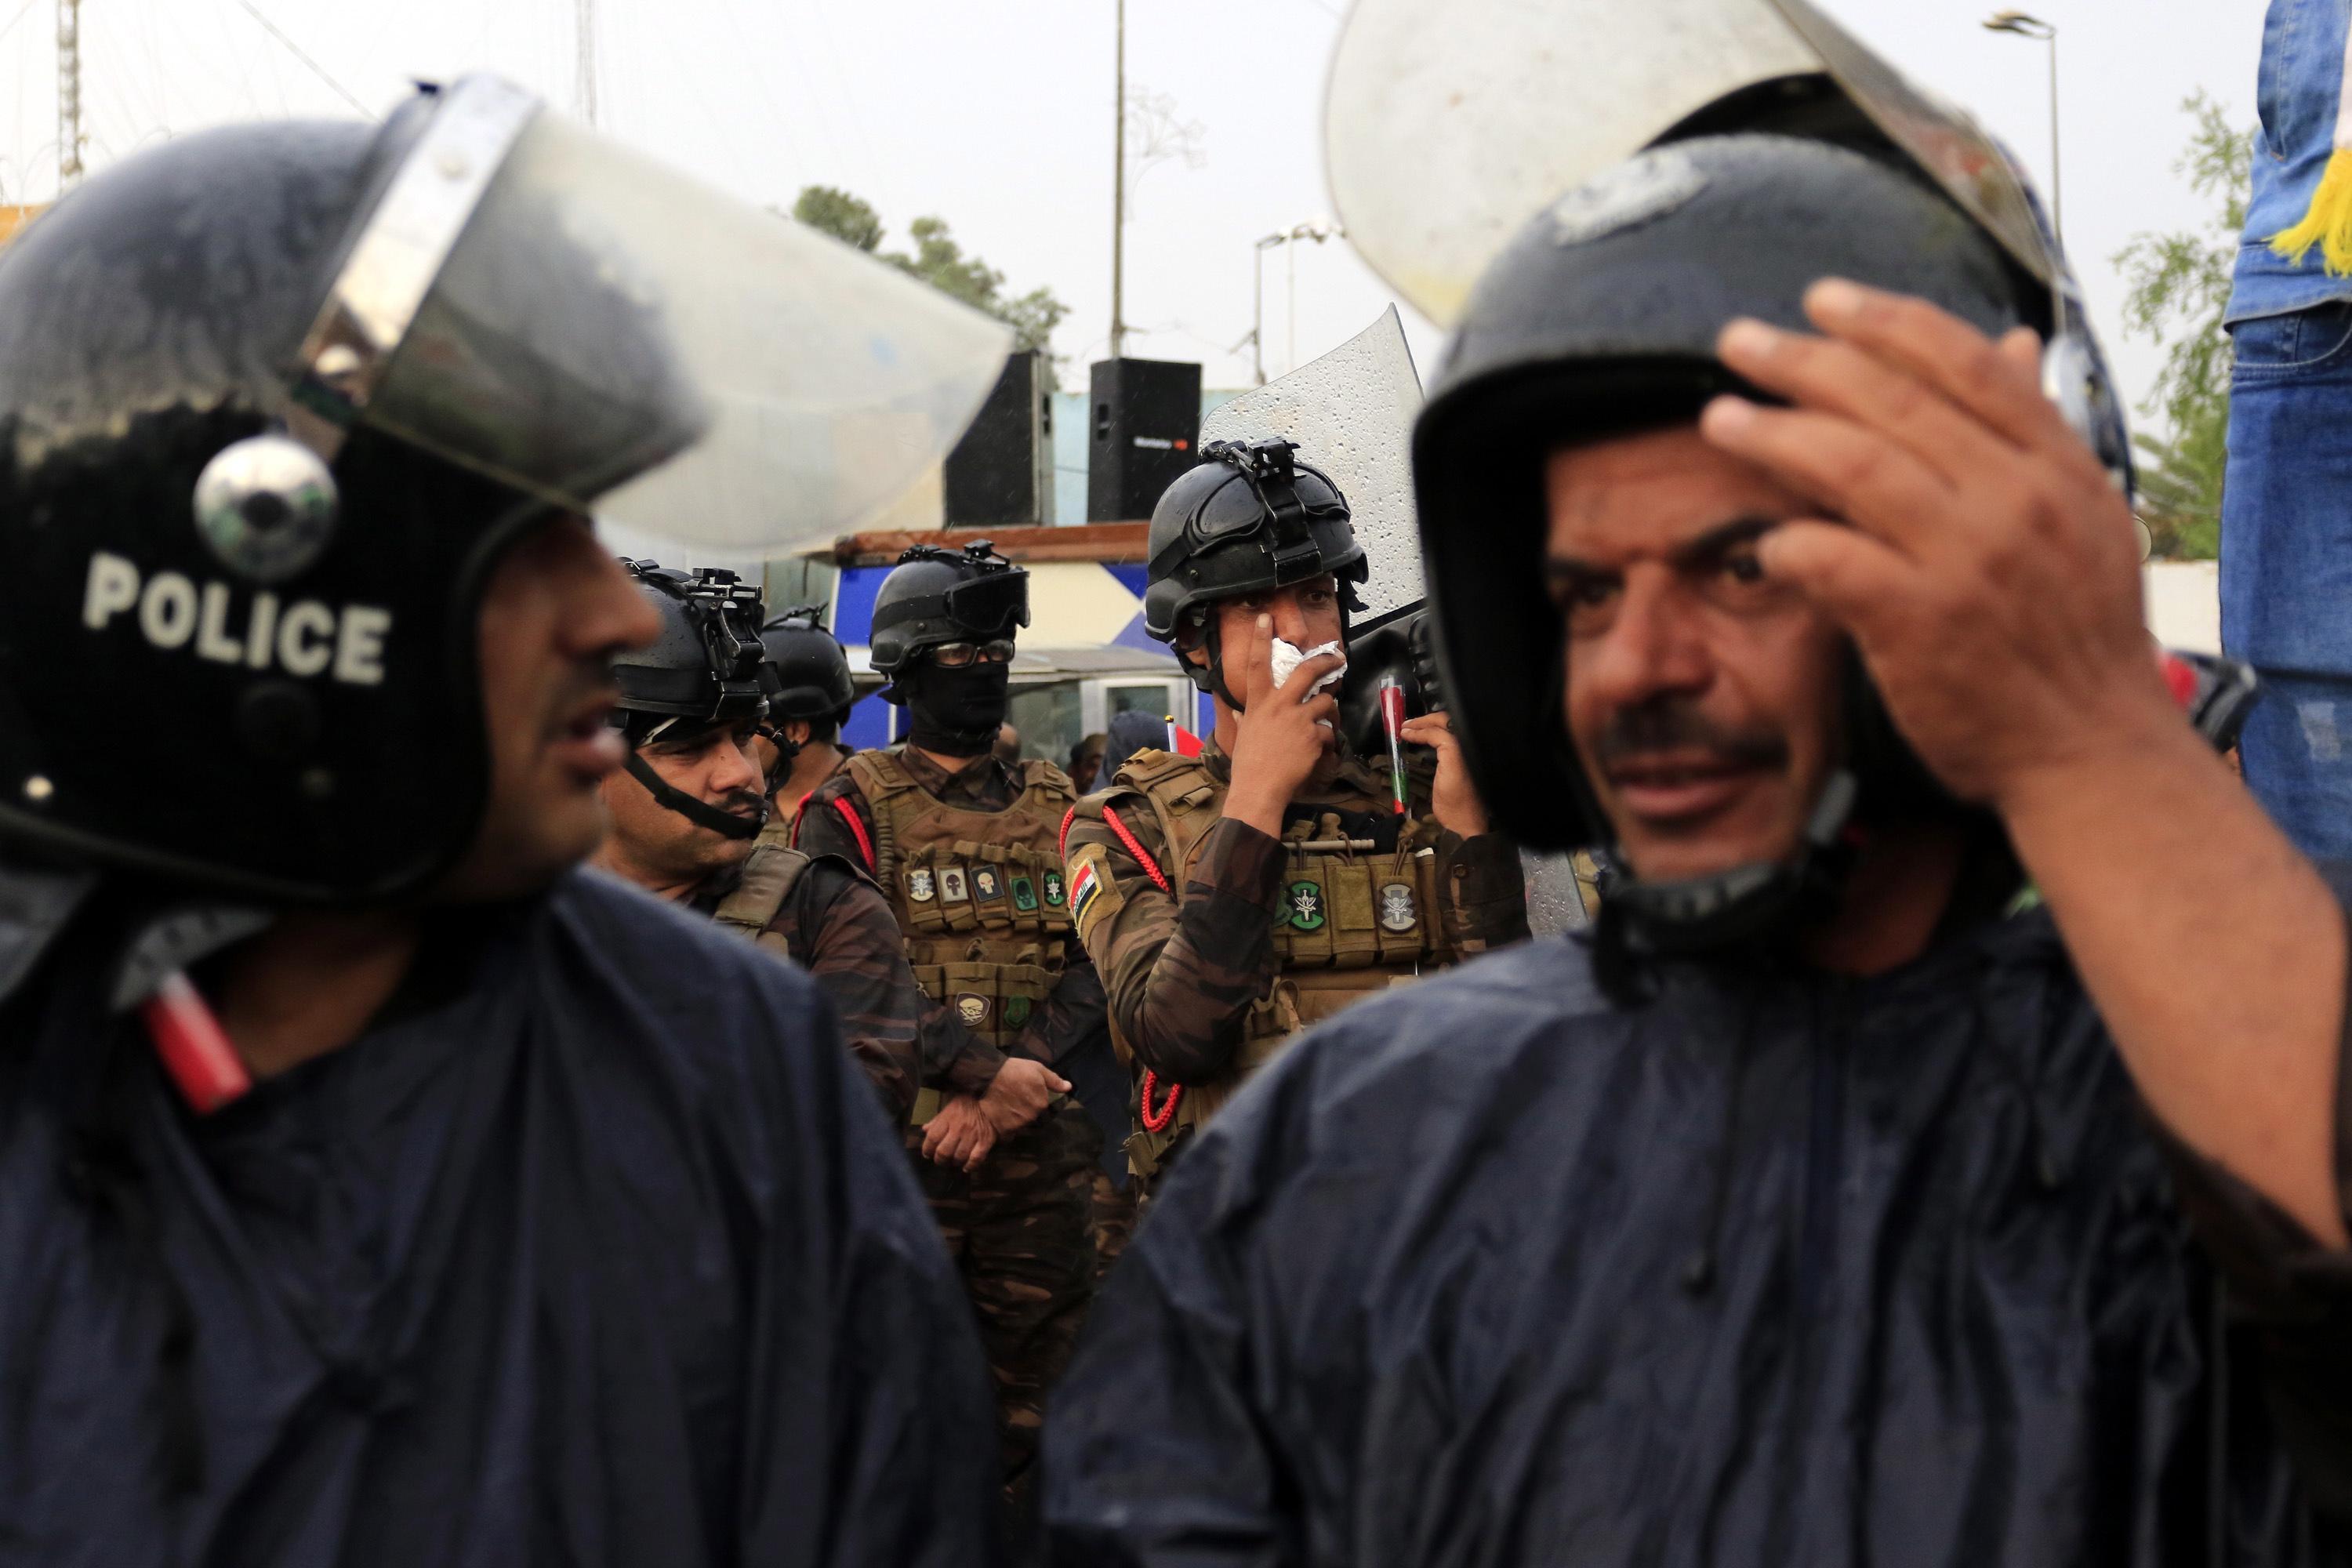 epa07949550 Iraqi riot police forces stand guard as Iraqi protesters take part in a demostration in Karbala, Iraq, 25 October 2019. Thousands of protesters in Baghdad and southern Iraqi cities staged new protests against the Iraqi government corruption and poor government services. At least 20 protesters were killed and dozens others were wounded during clashes with riot police forces in Baghdad and Nasriyah city southern Iraq.  EPA/FURQAN AL-AARAJI